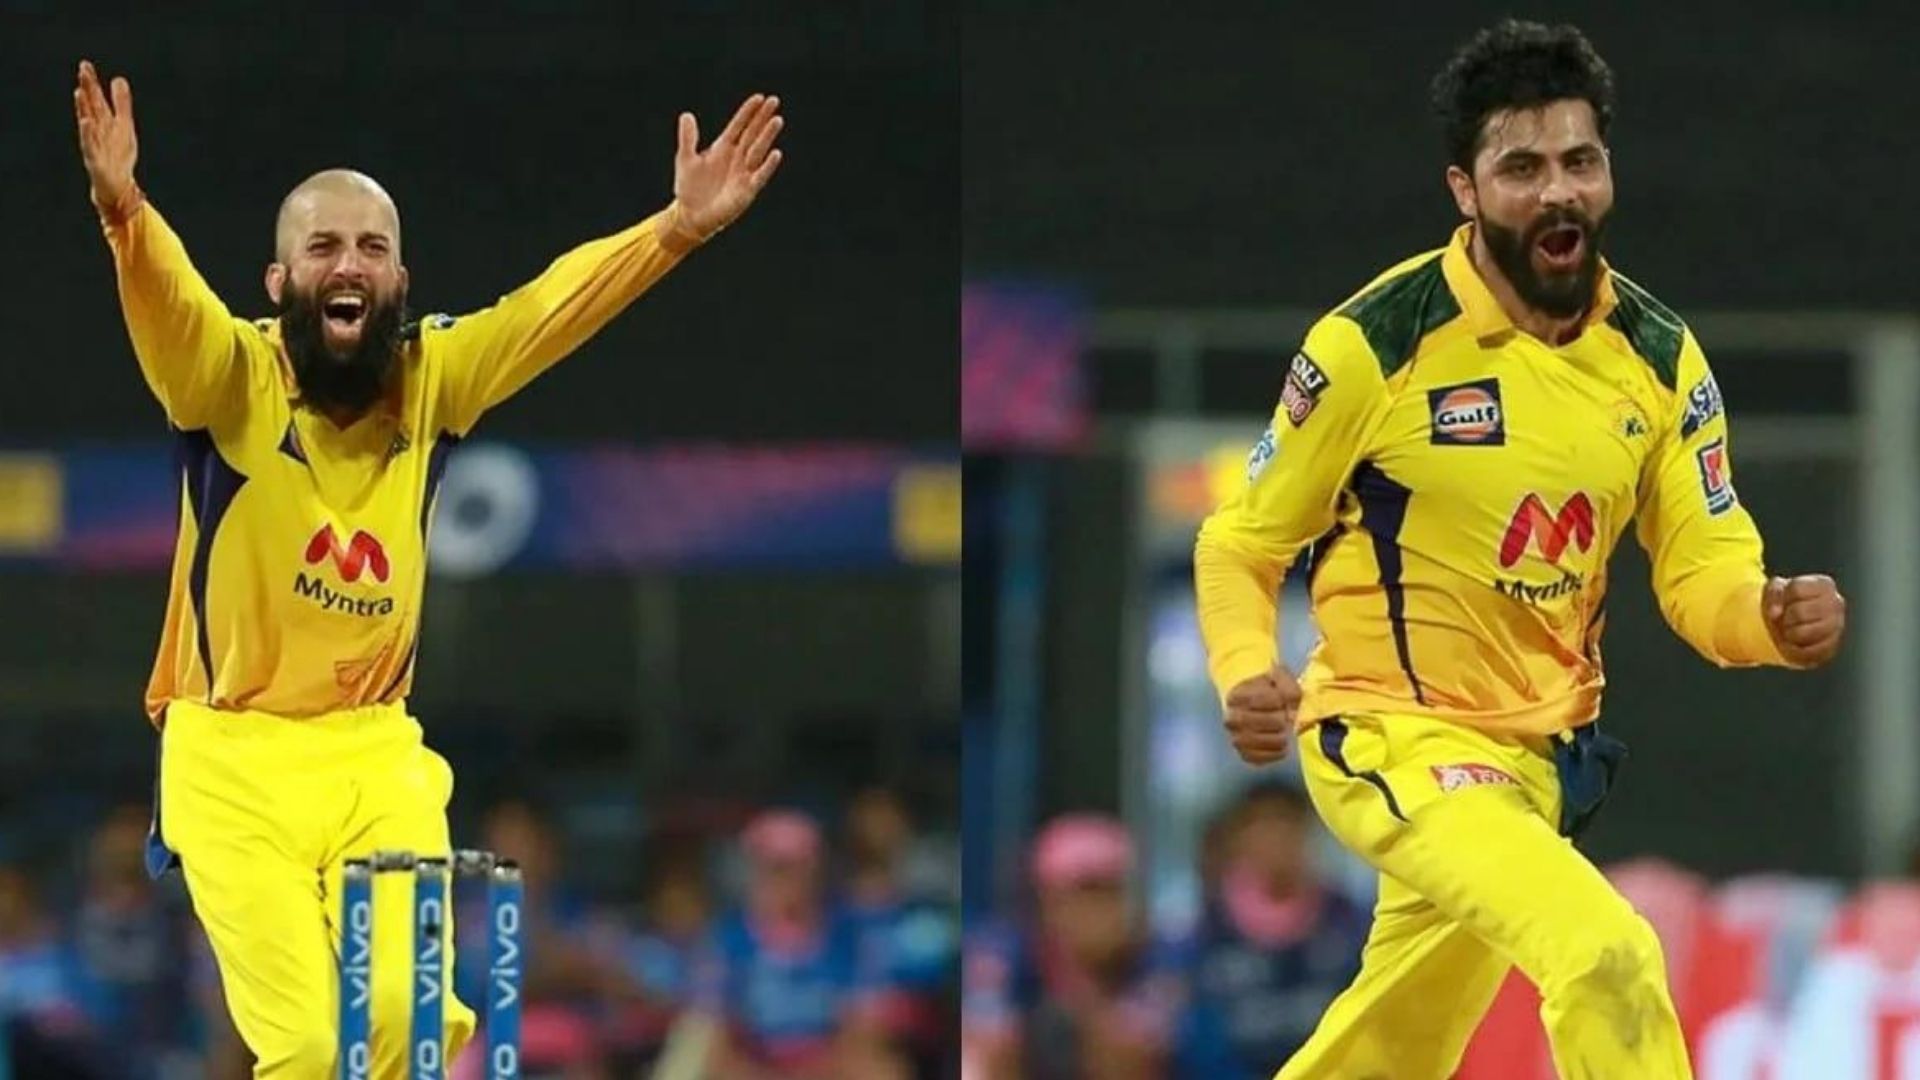 Moeen Ali (L) and Ravindra Jadeja can be the front-runners to be the heir to MS Dhoni